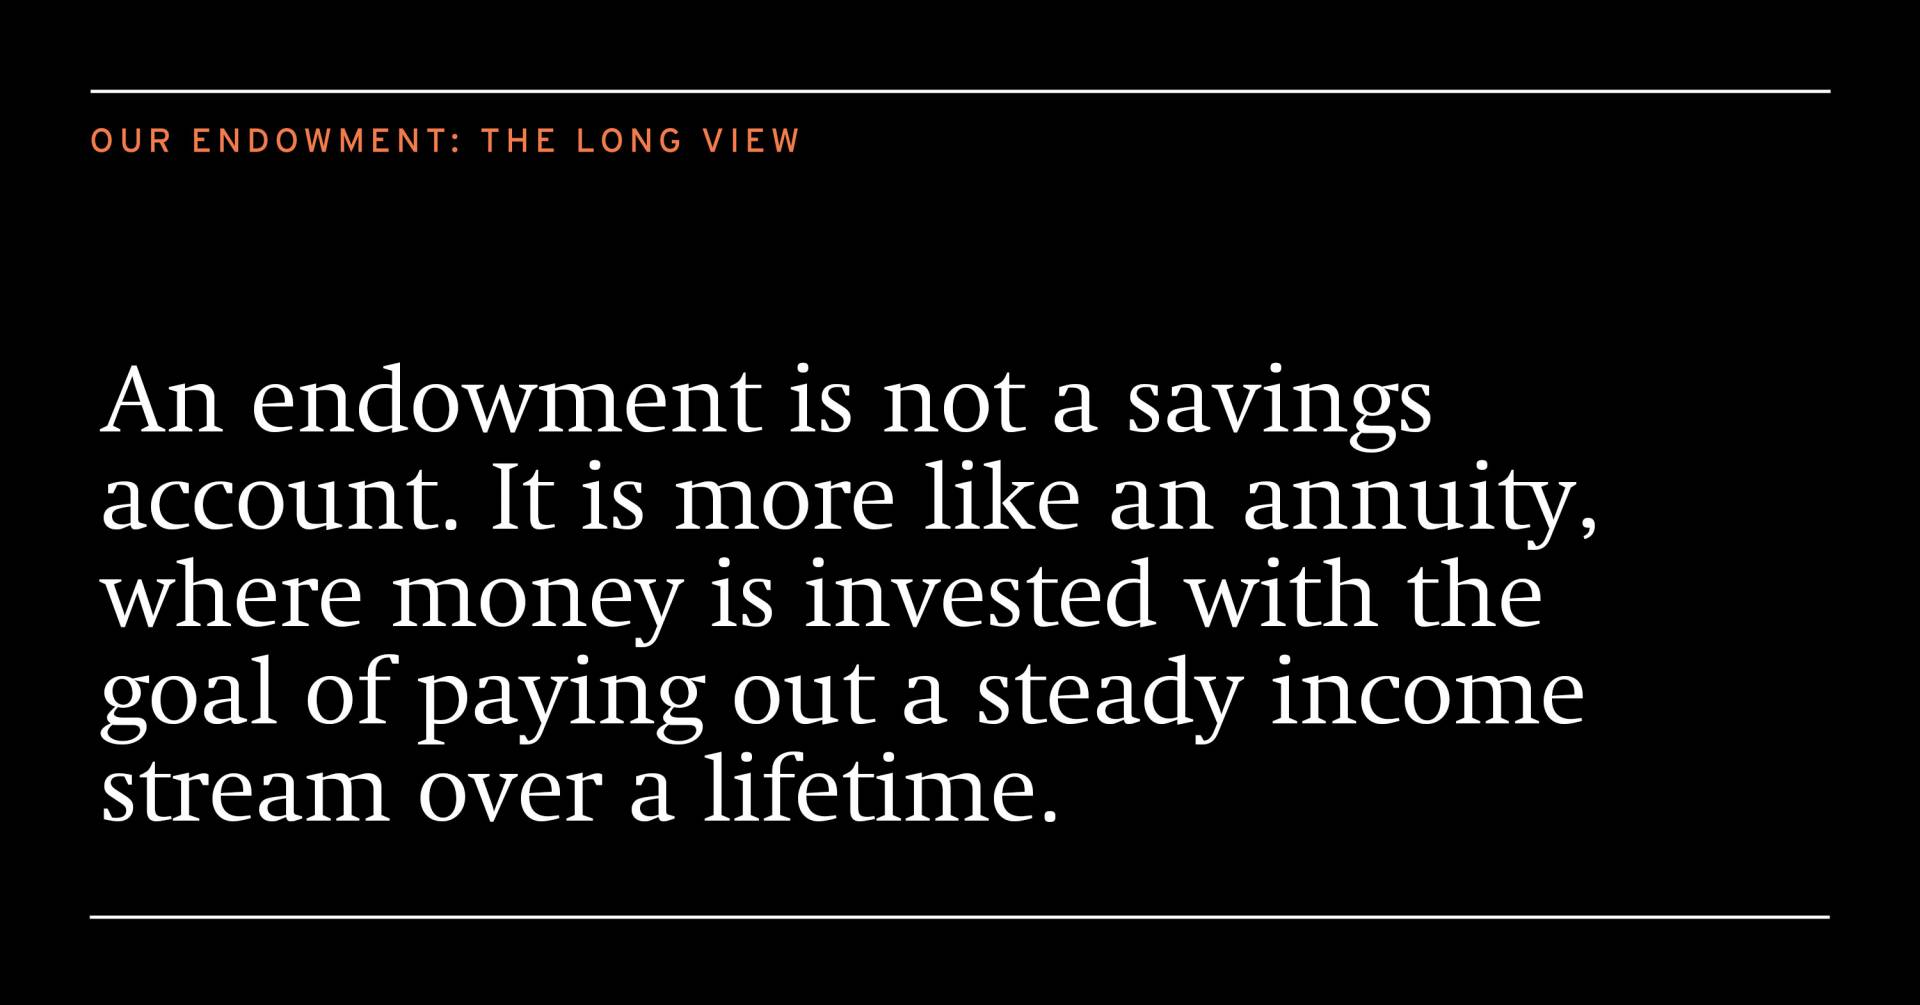 An endowment is not a savings account. It is more like an annuity, where money is invested with the goal of paying out a steady income stream over a lifetime.